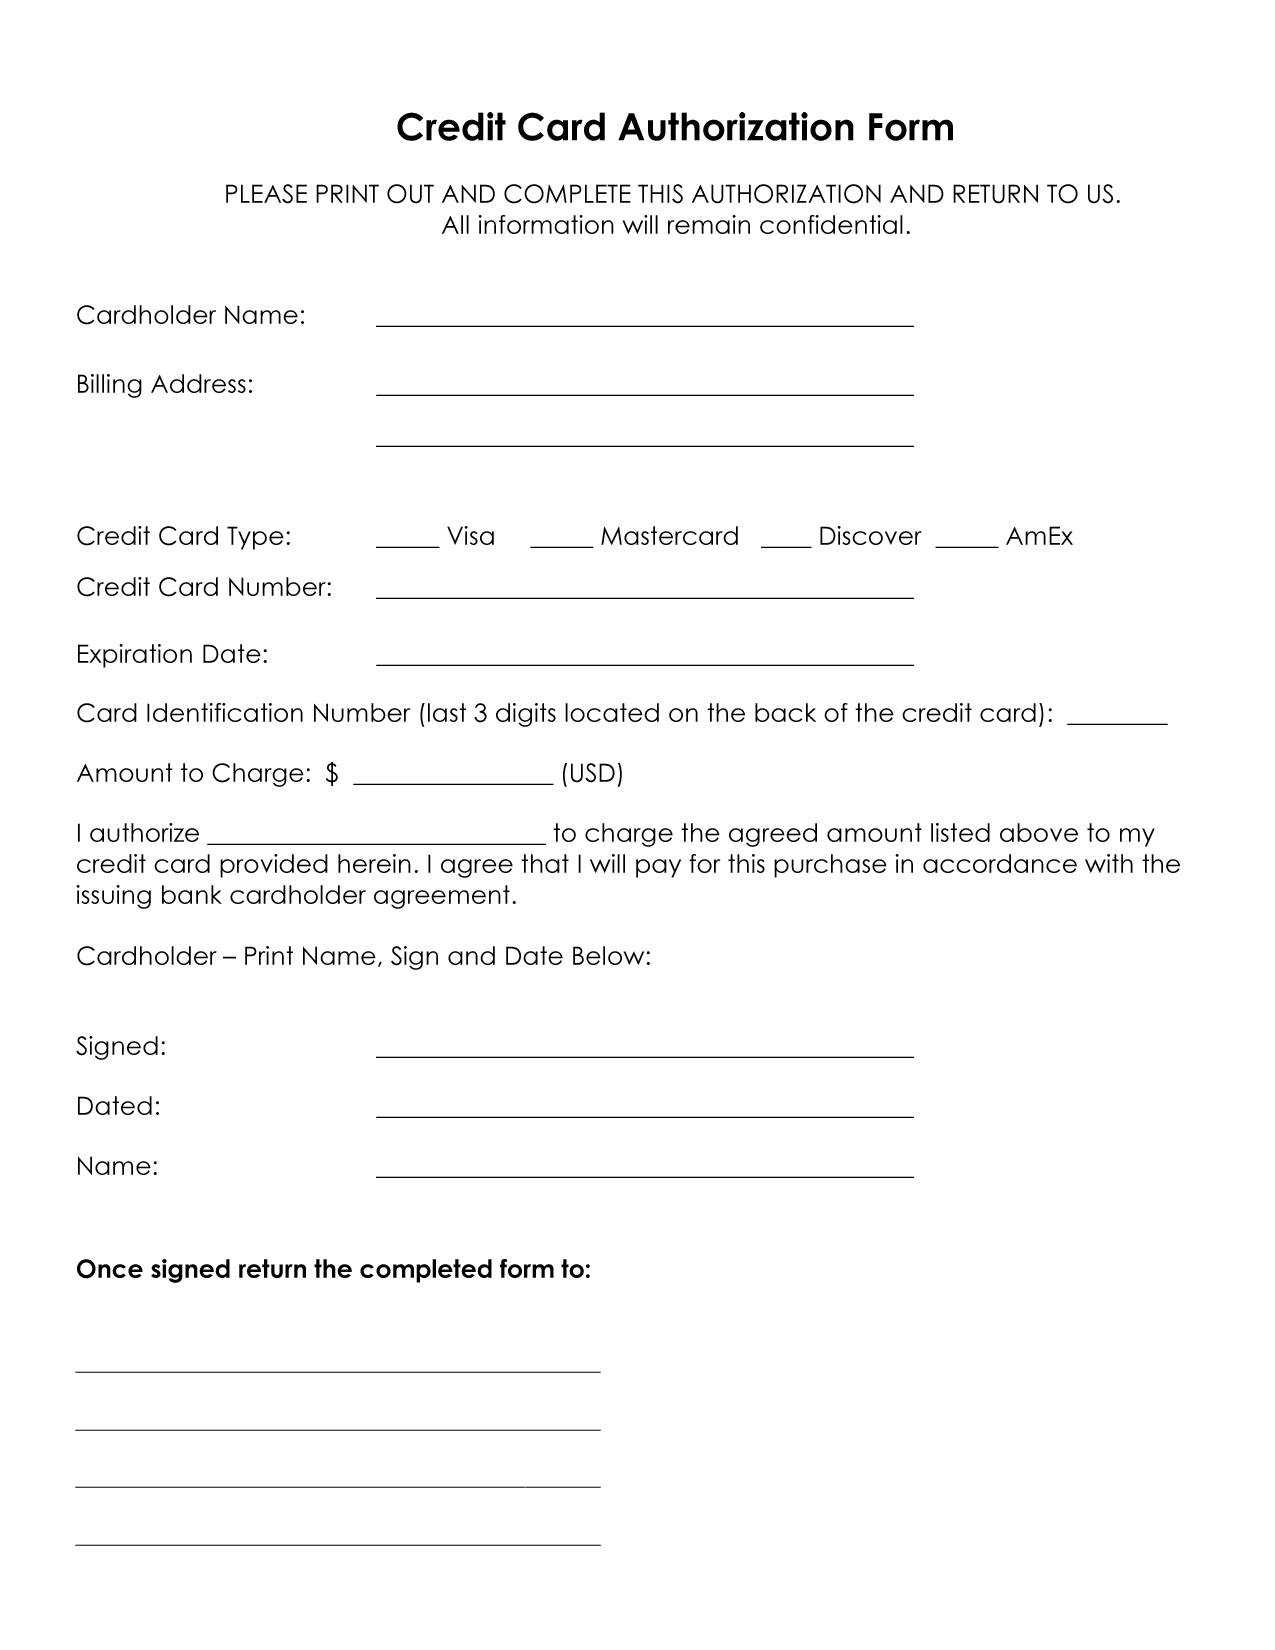 Credit Card Authorization Form Template Microsoft – Calep Intended For Credit Card Authorization Form Template Word